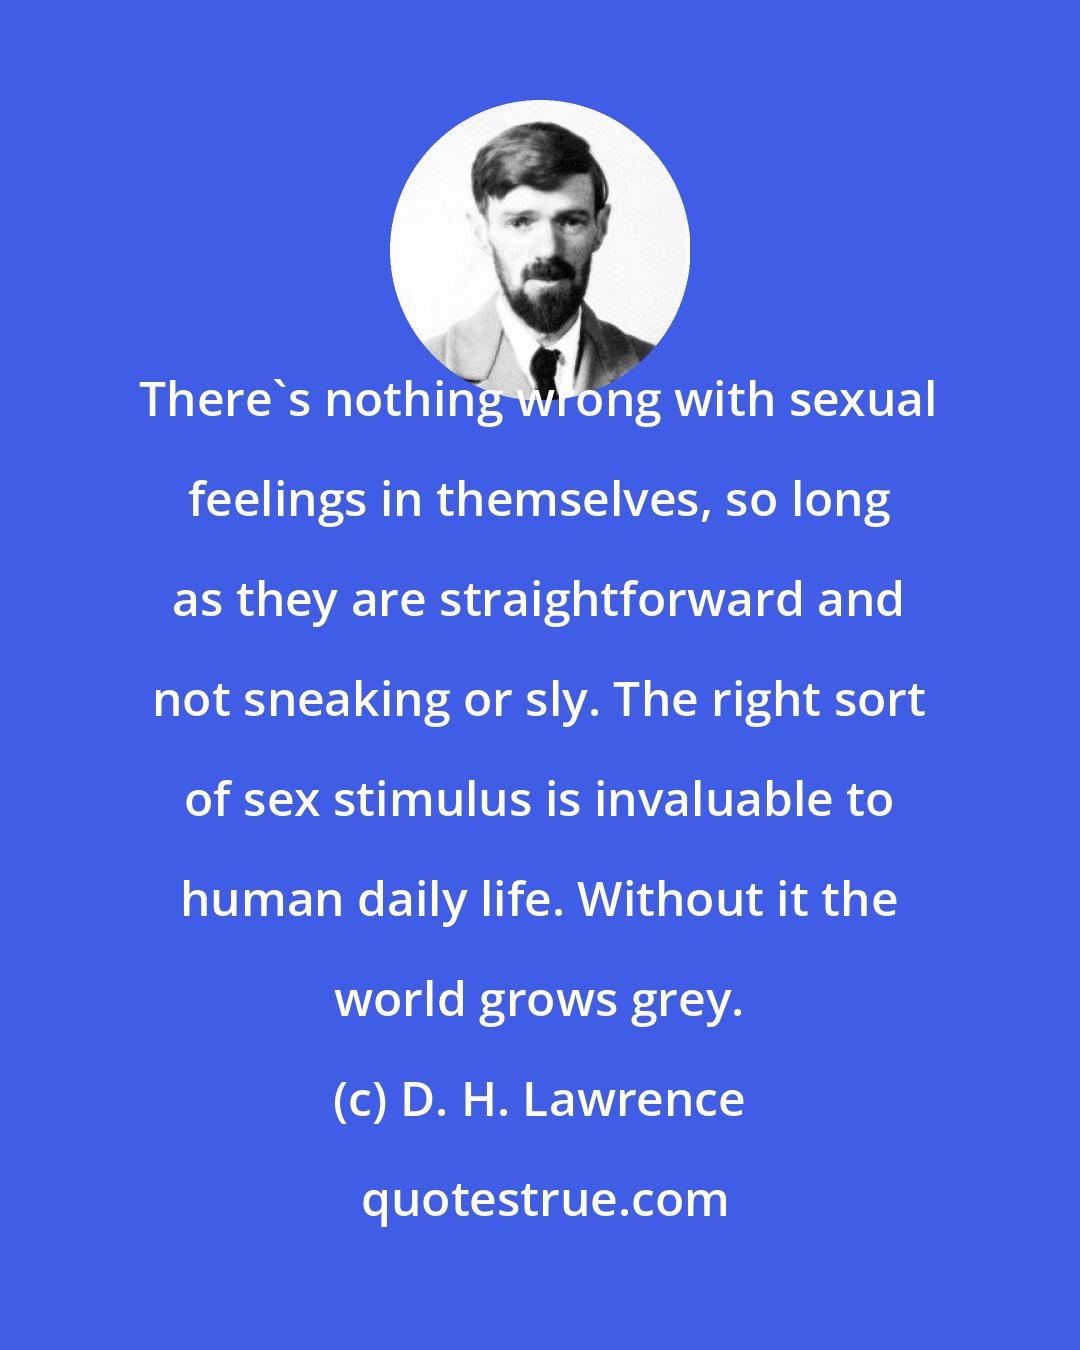 D. H. Lawrence: There's nothing wrong with sexual feelings in themselves, so long as they are straightforward and not sneaking or sly. The right sort of sex stimulus is invaluable to human daily life. Without it the world grows grey.